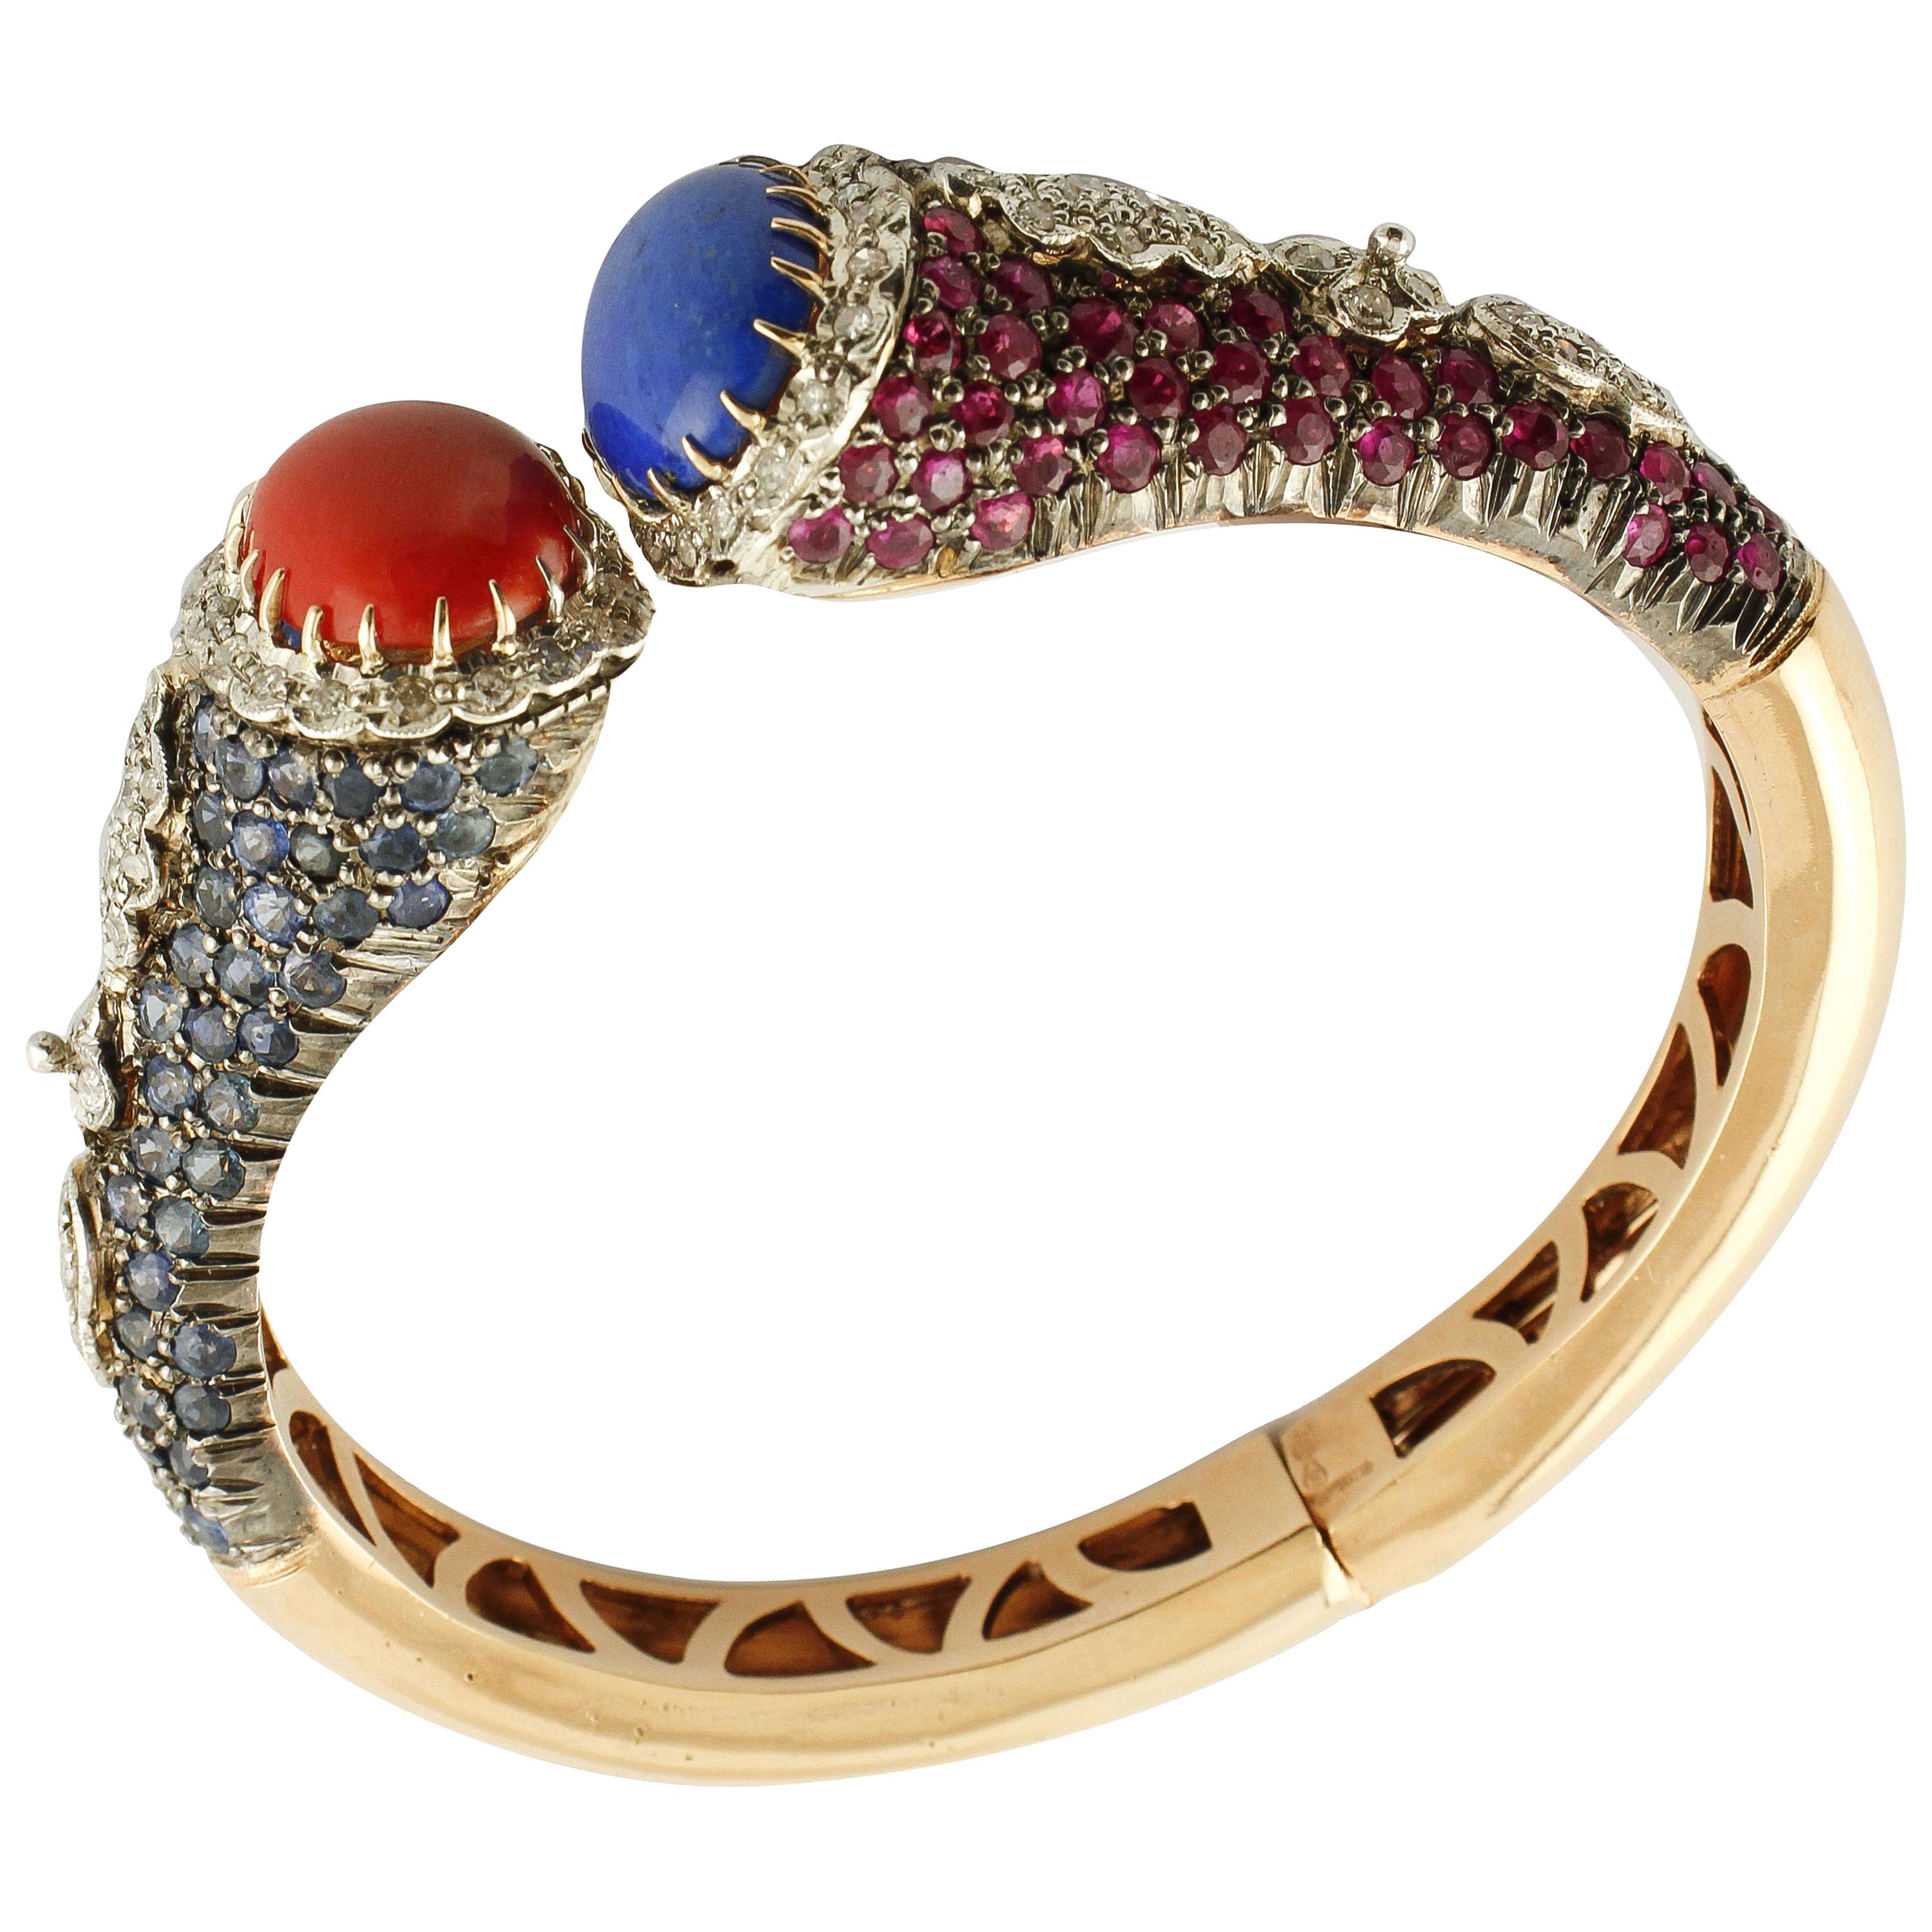 Diamonds, Rubies, Sapphires, Red Coral, Lapis Rose Gold Silver Cuff Bracelet